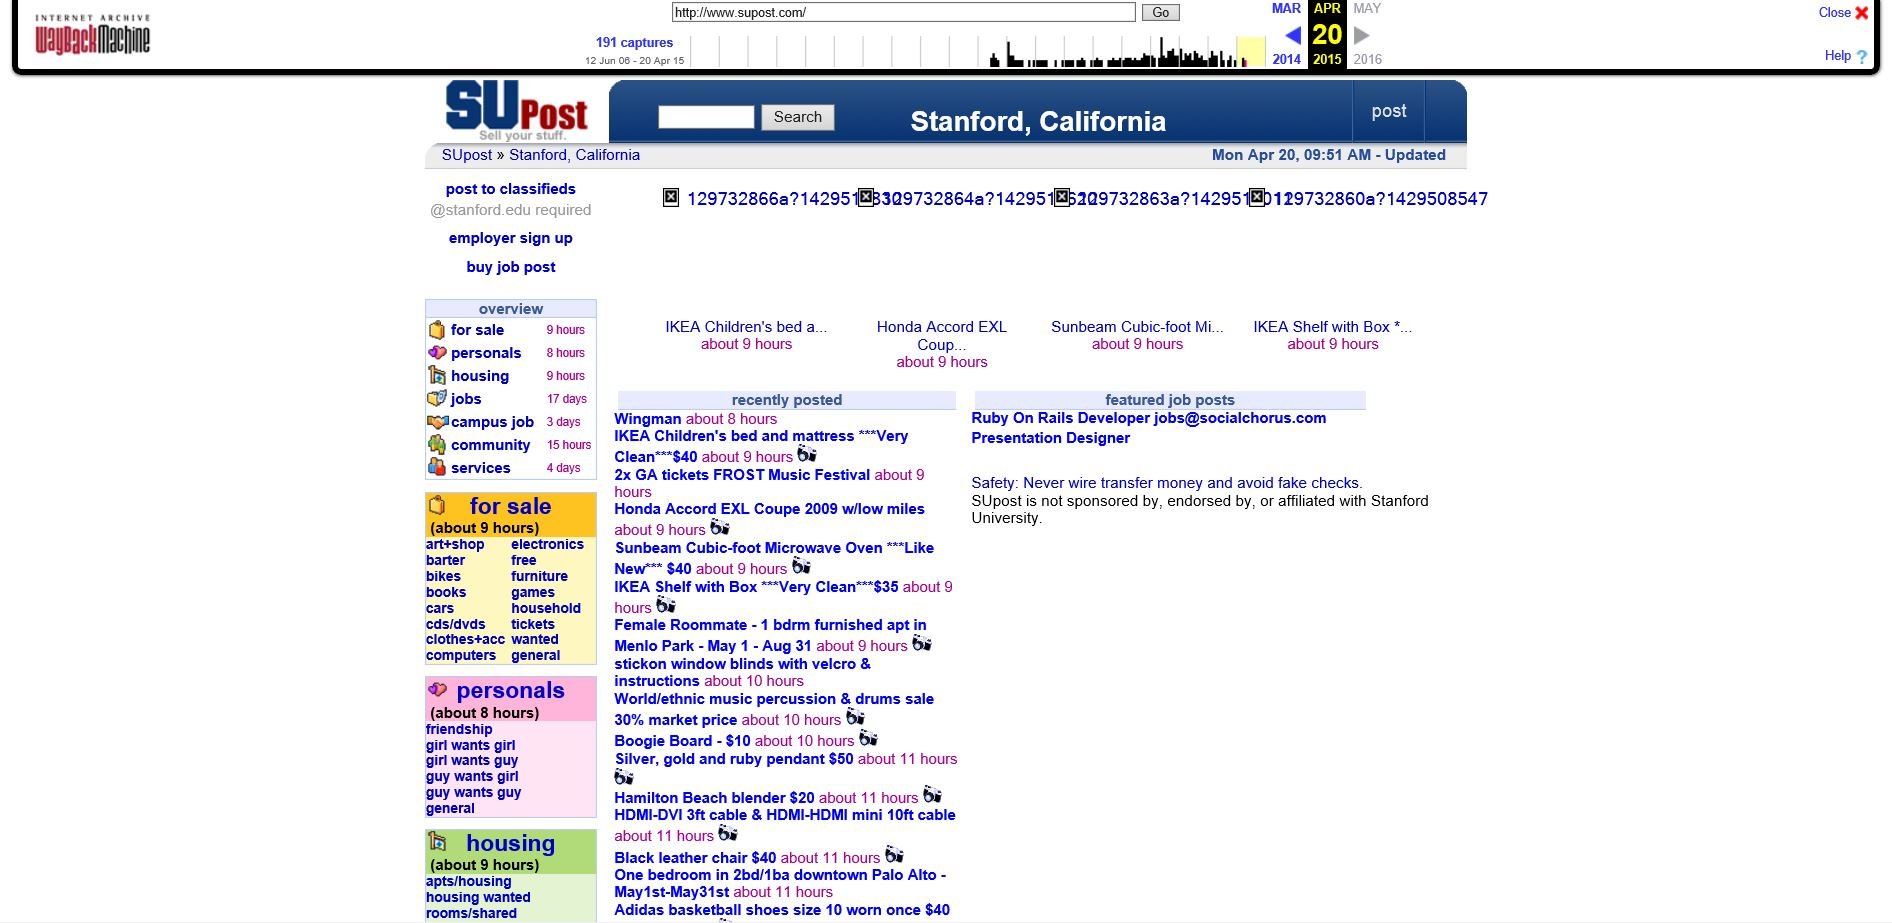 SUPost.com as of March 20, 2015. Courtesy The Wayback Machine, Archive of The Internet.